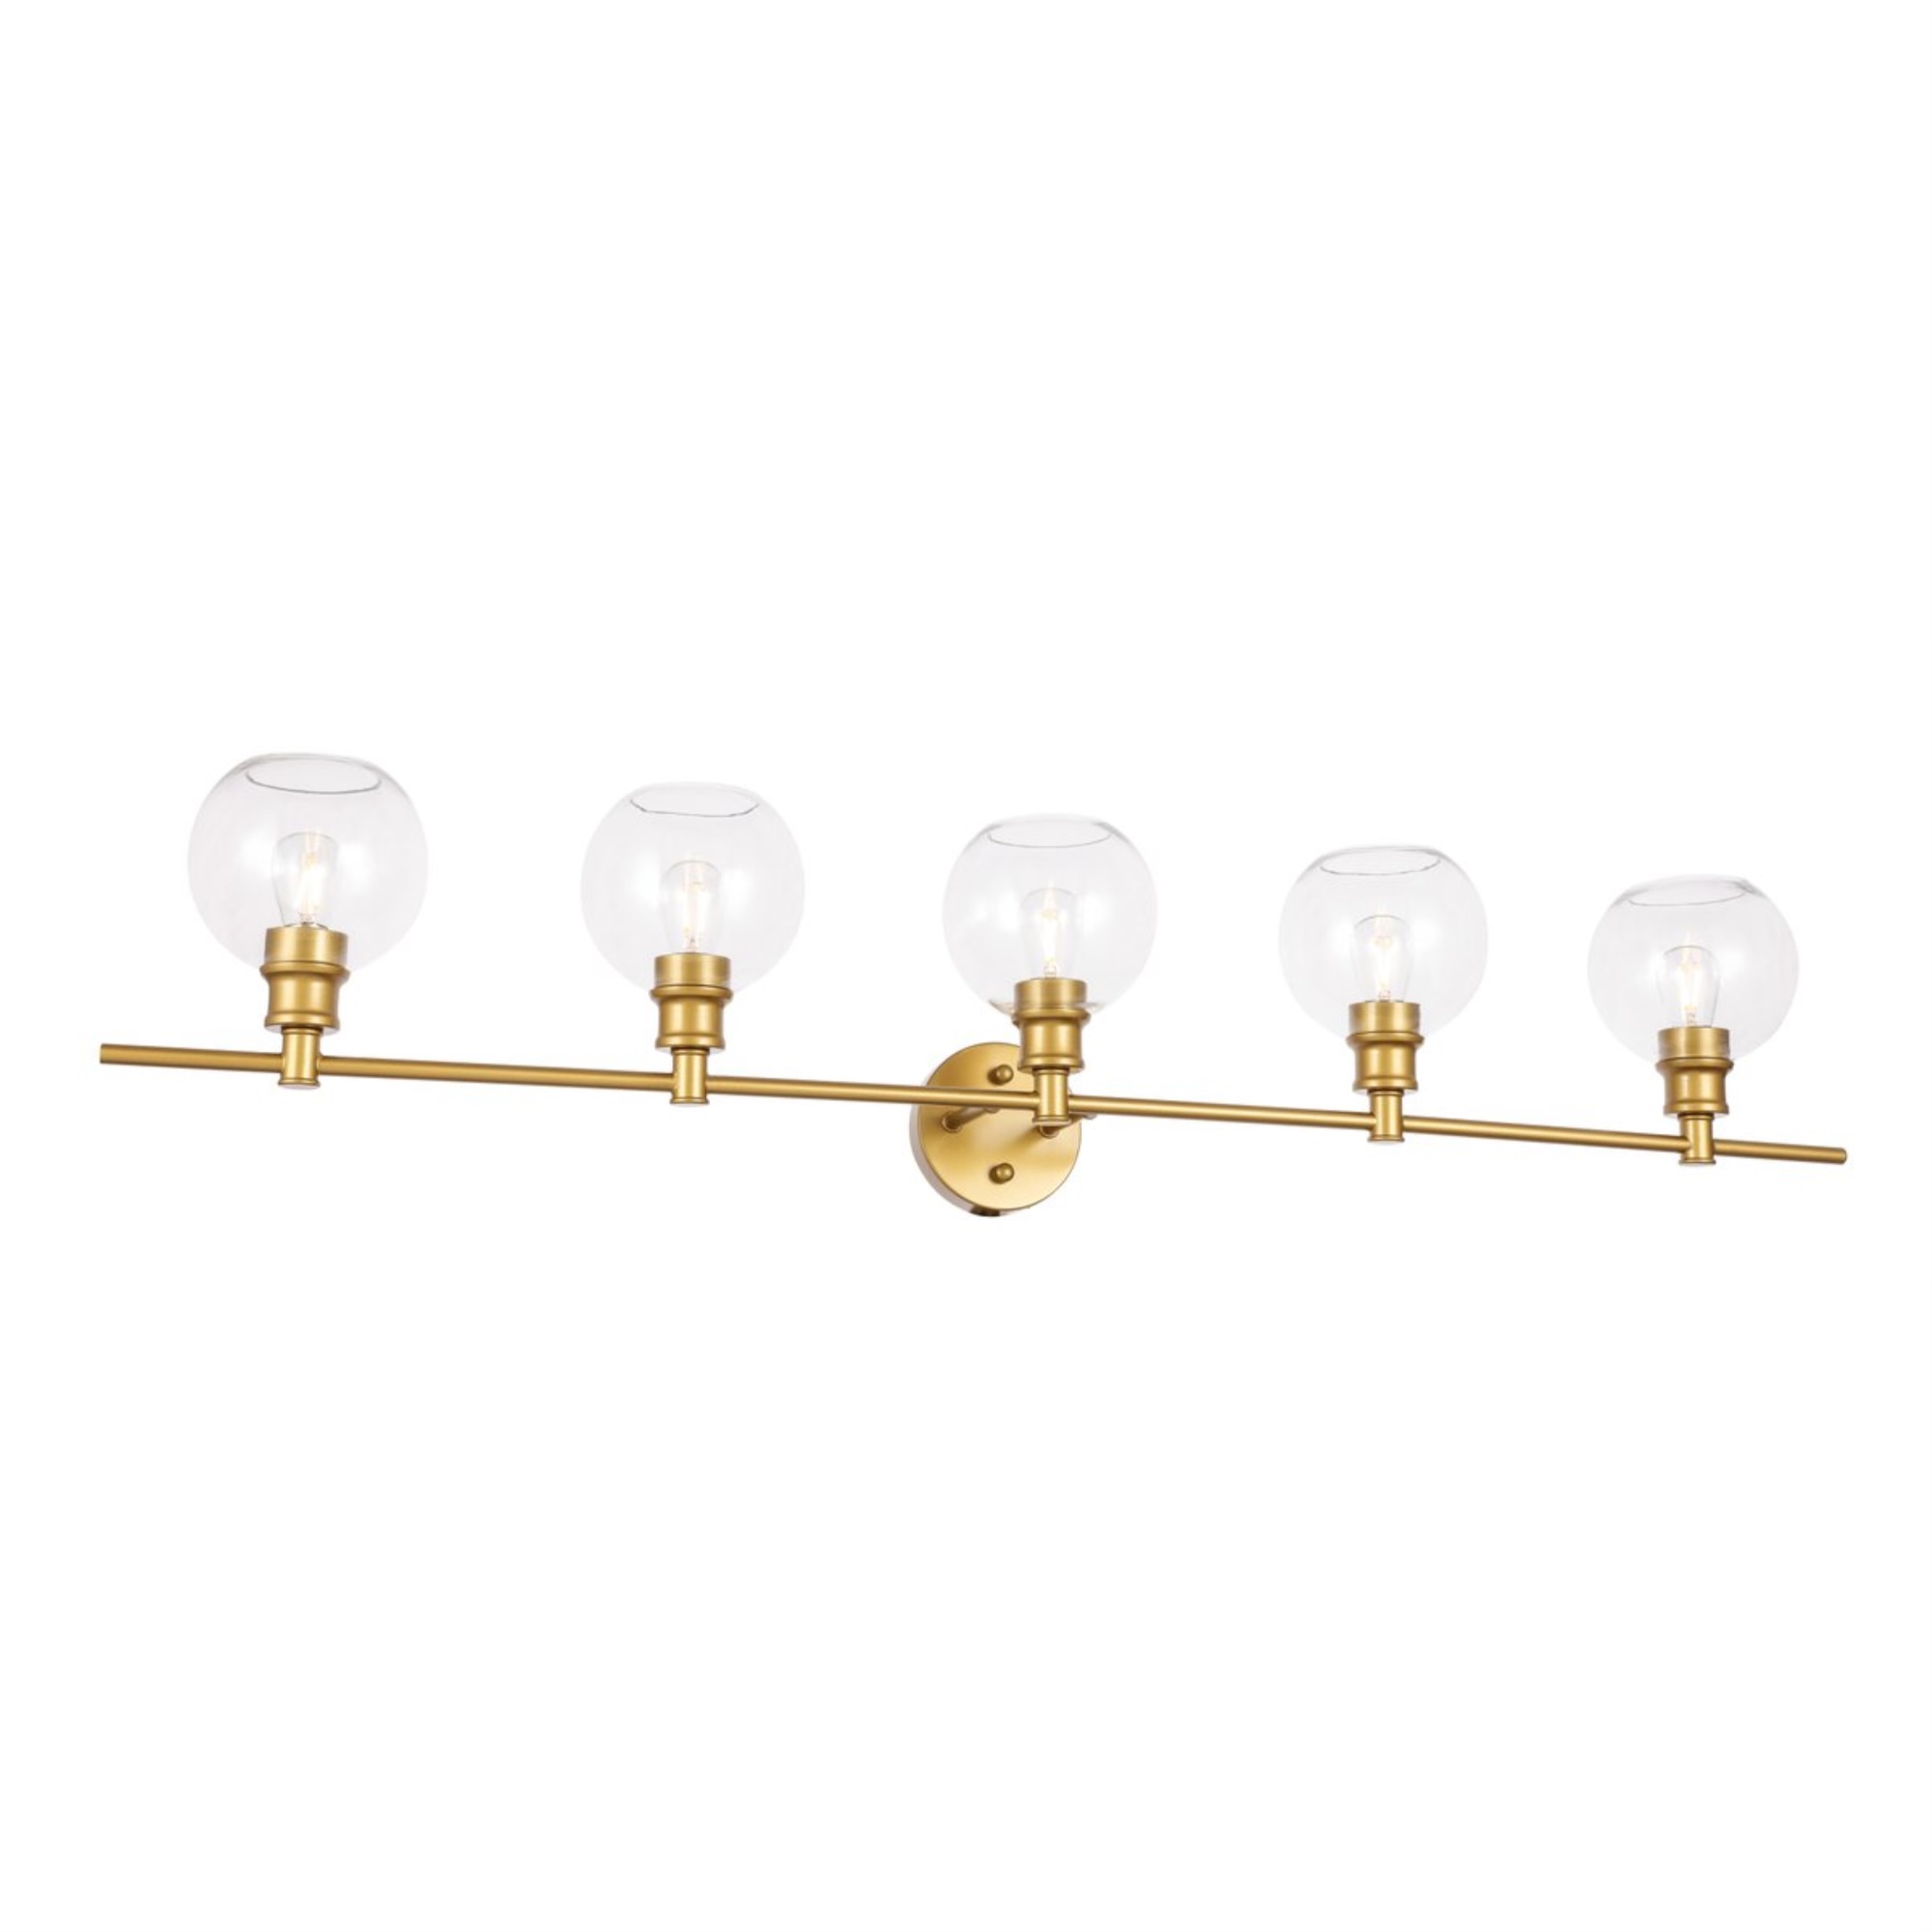 Living District Collier 5 light Brass and Clear glass Wall sconce